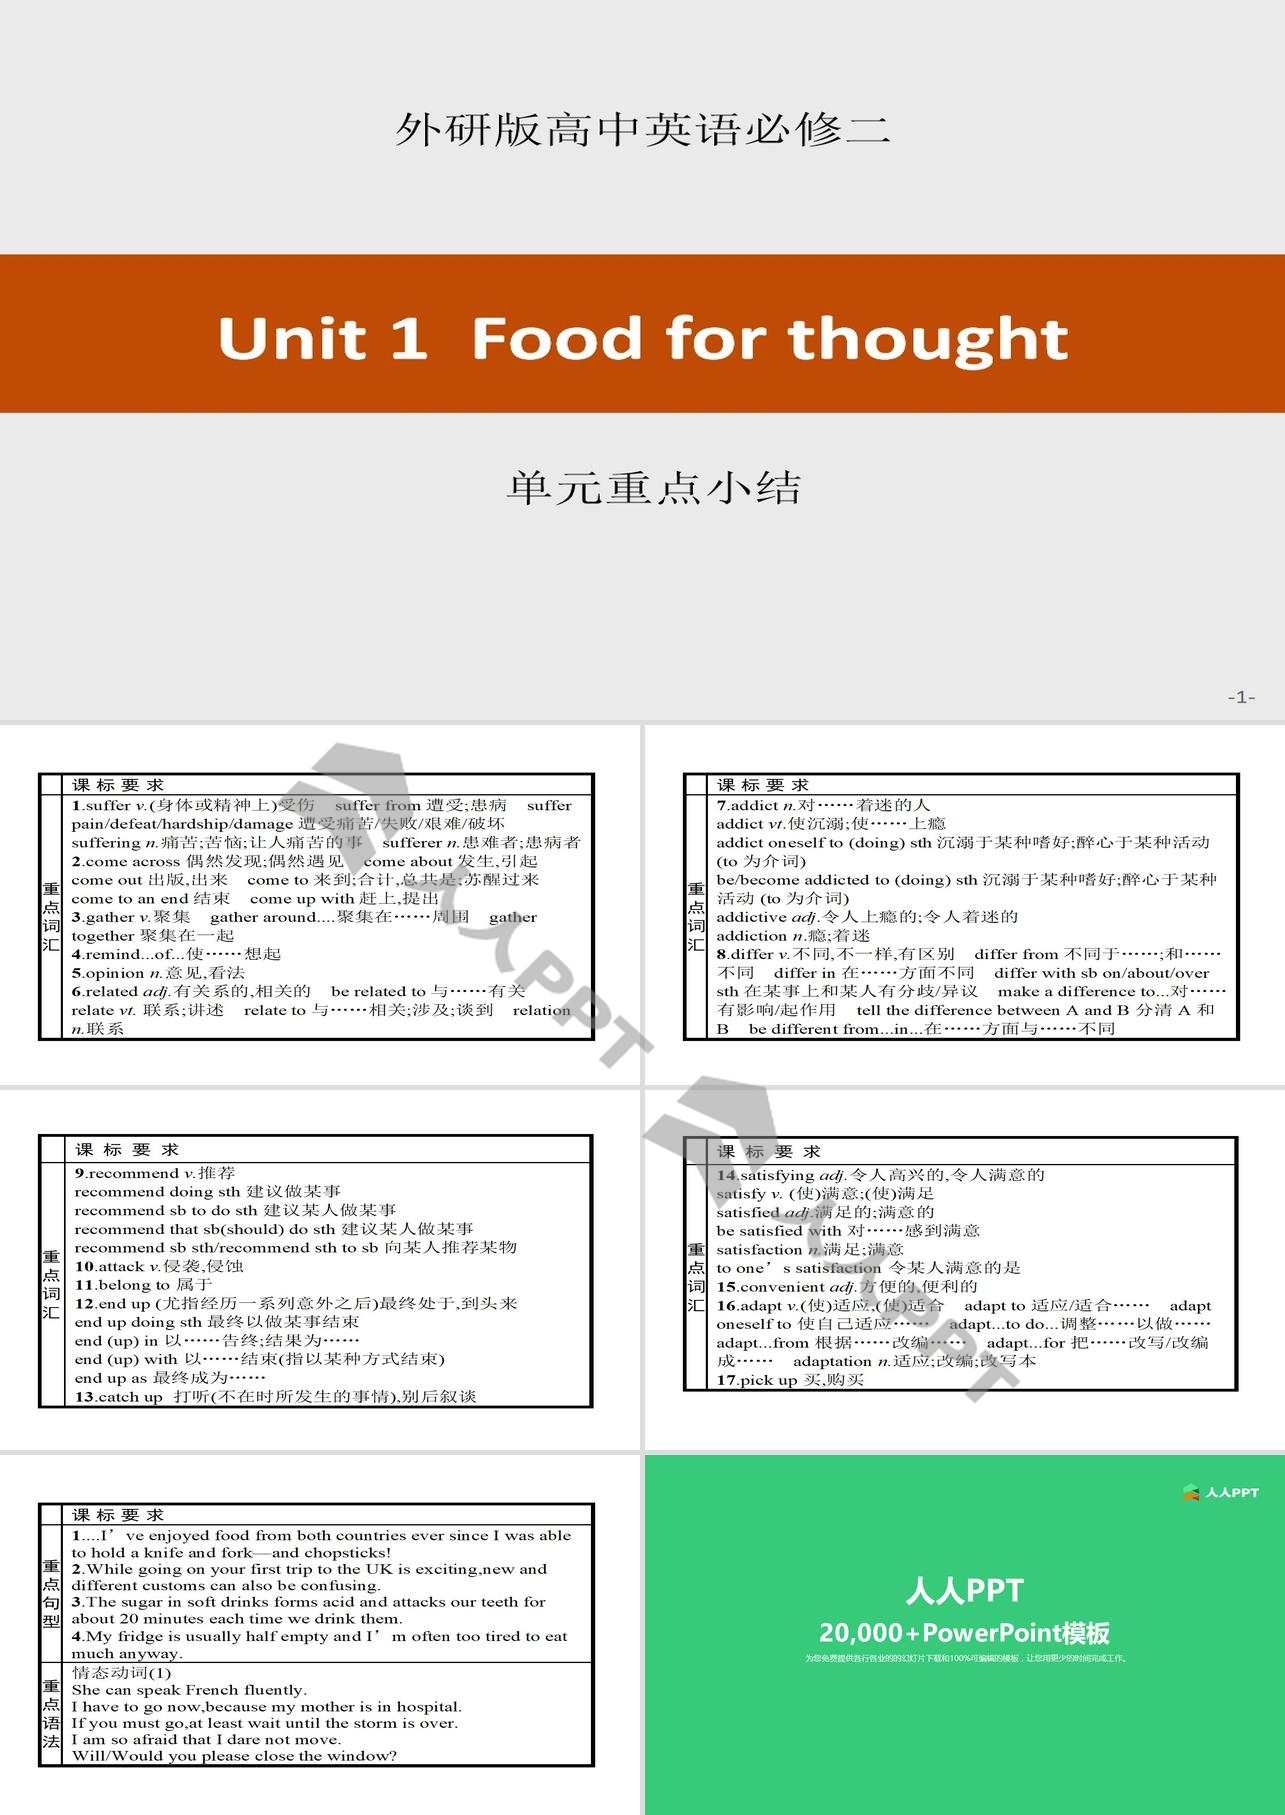 《Food for thought》单元重点小结PPT长图